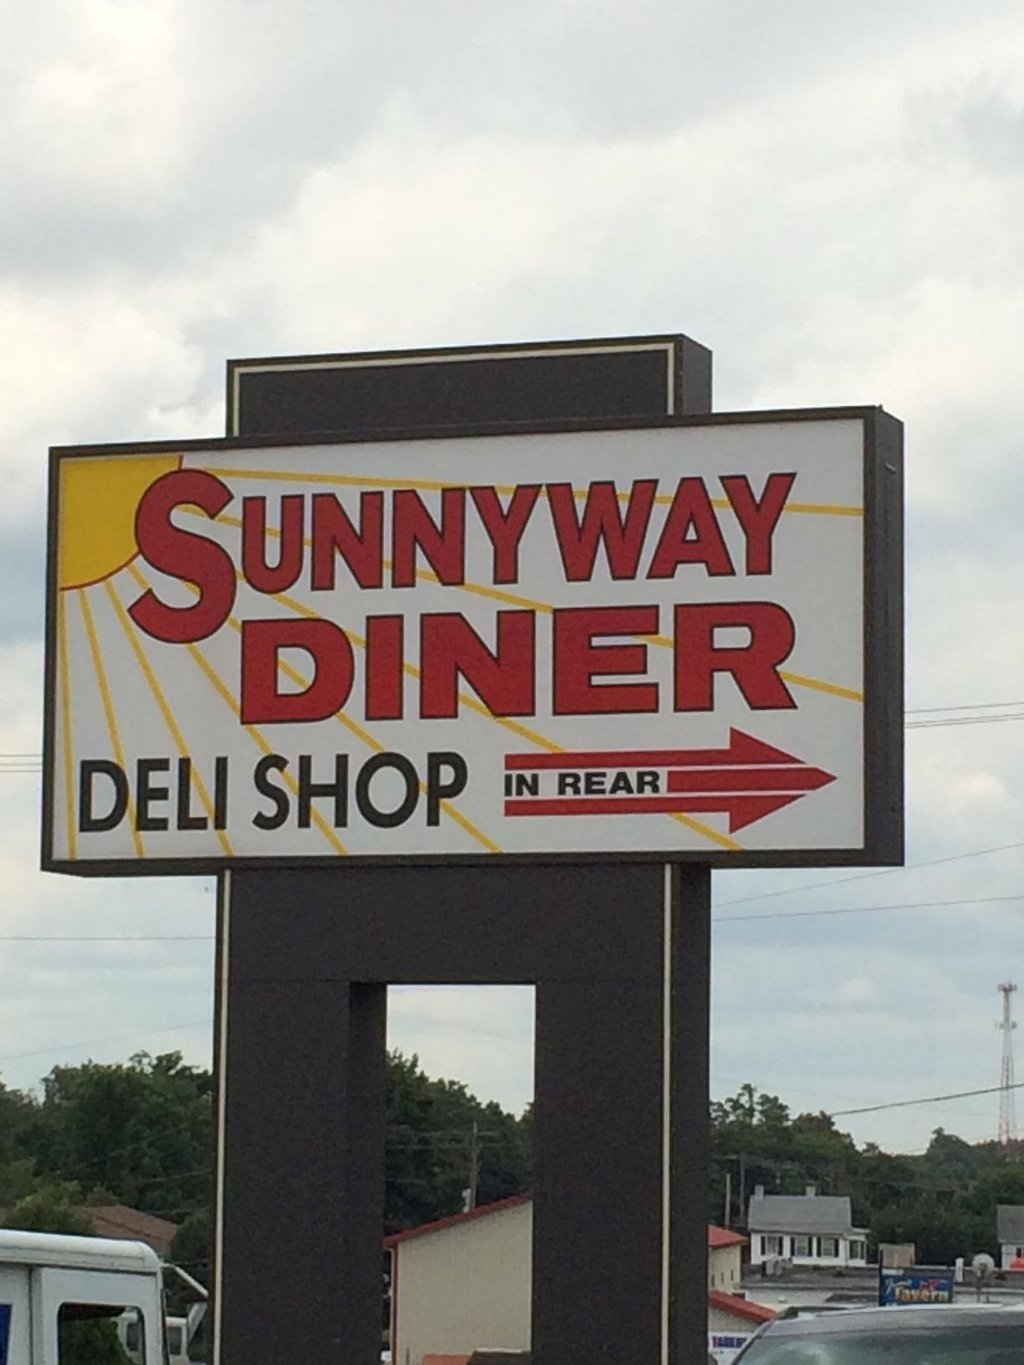 Sunnyway Diner